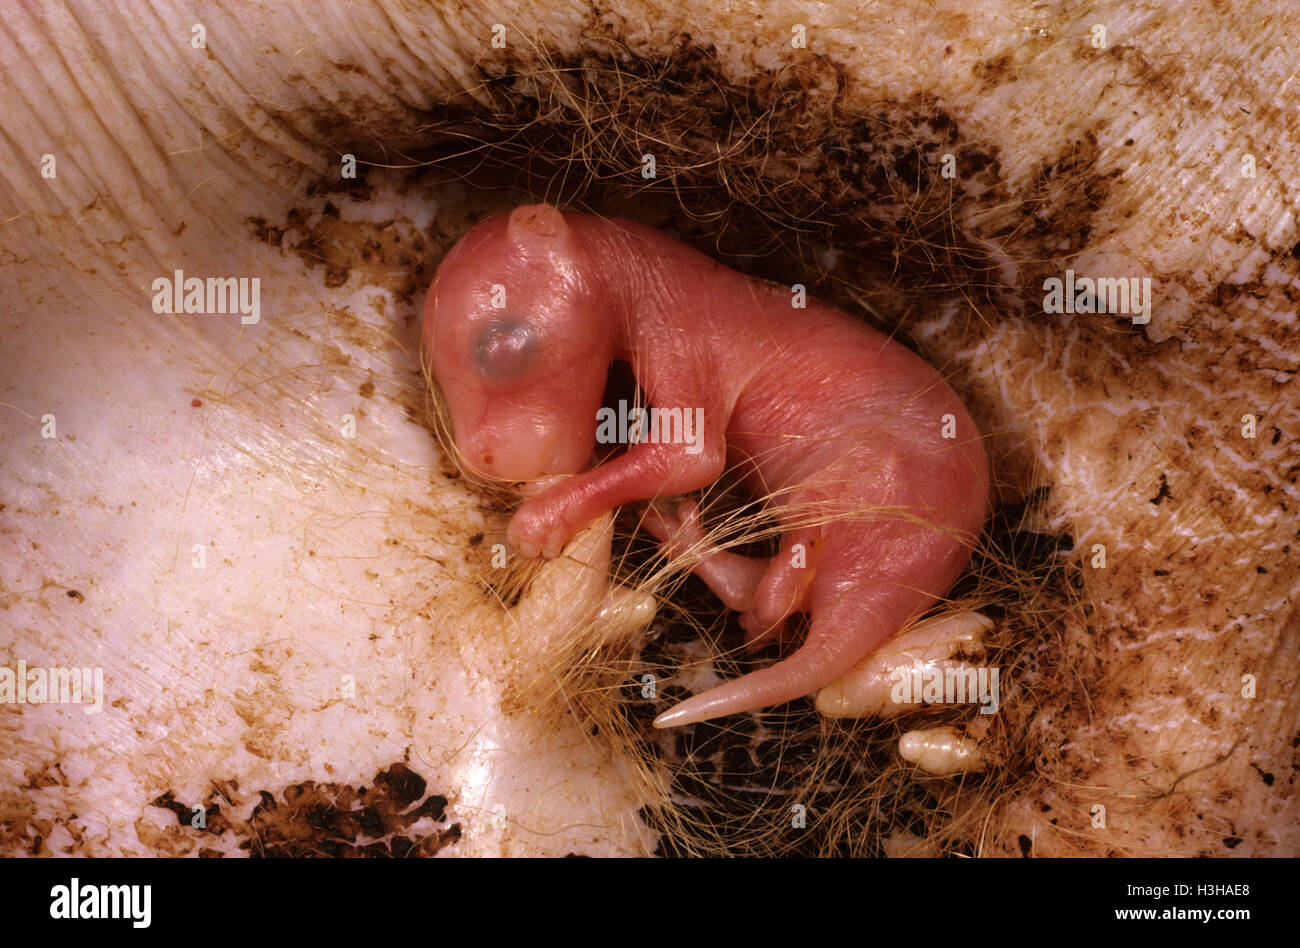 Red kangaroo (Macropus rufus), young about three weeks old, inside pouch attached to teat. Stock Photo